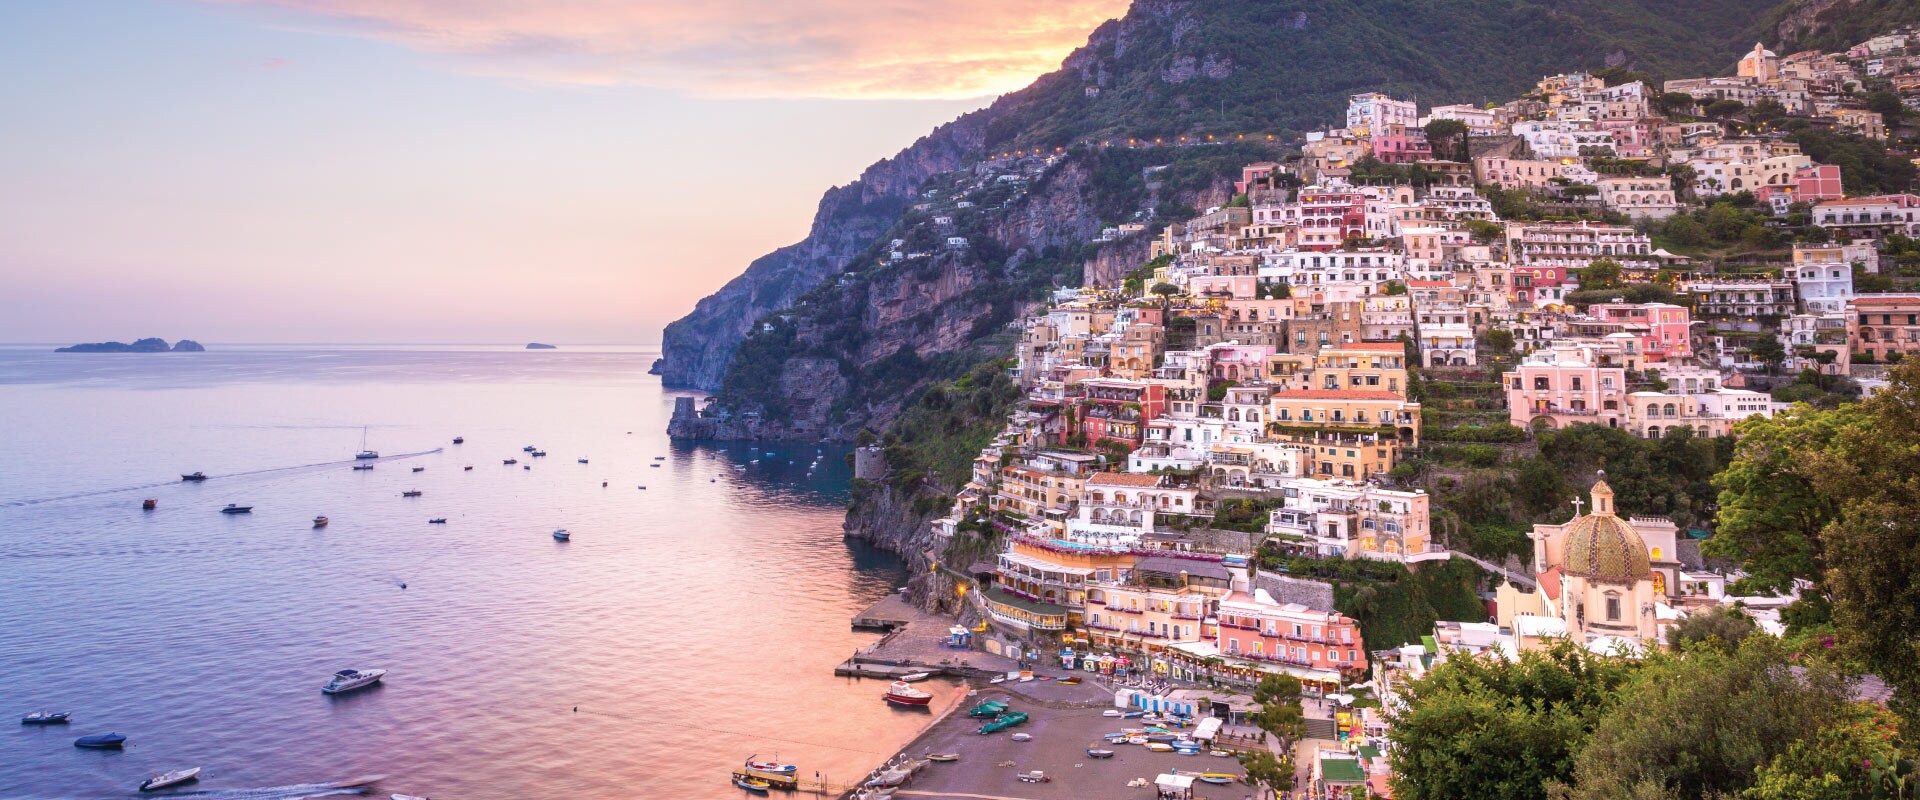 View of seaside town climbing the hill which looks out towards the ocean at sunset, Italy